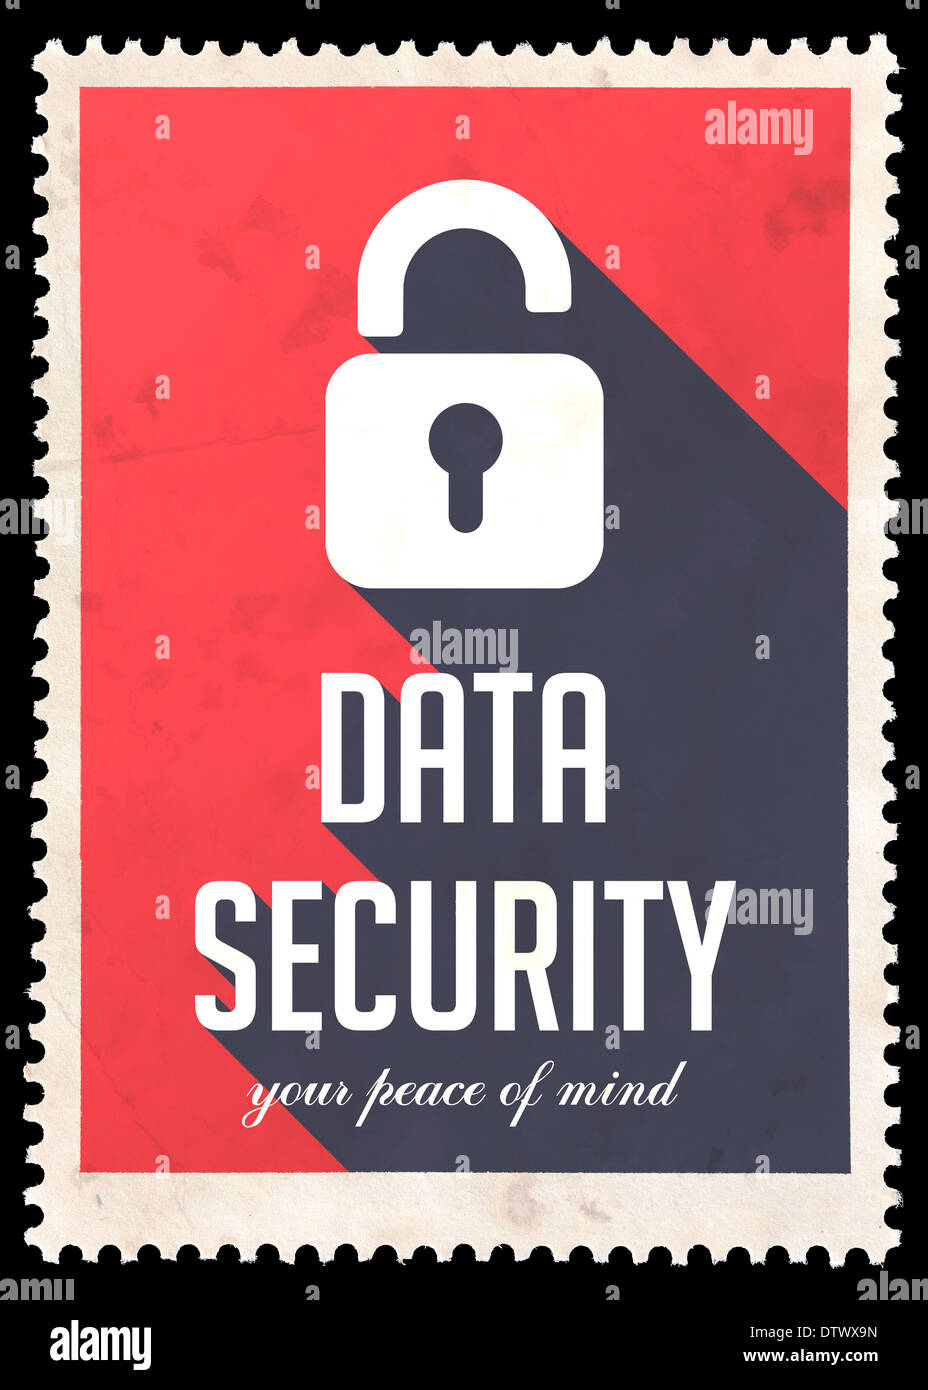 Data Security on Red Background. Vintage Concept in Flat Design with Long Shadows. Stock Photo